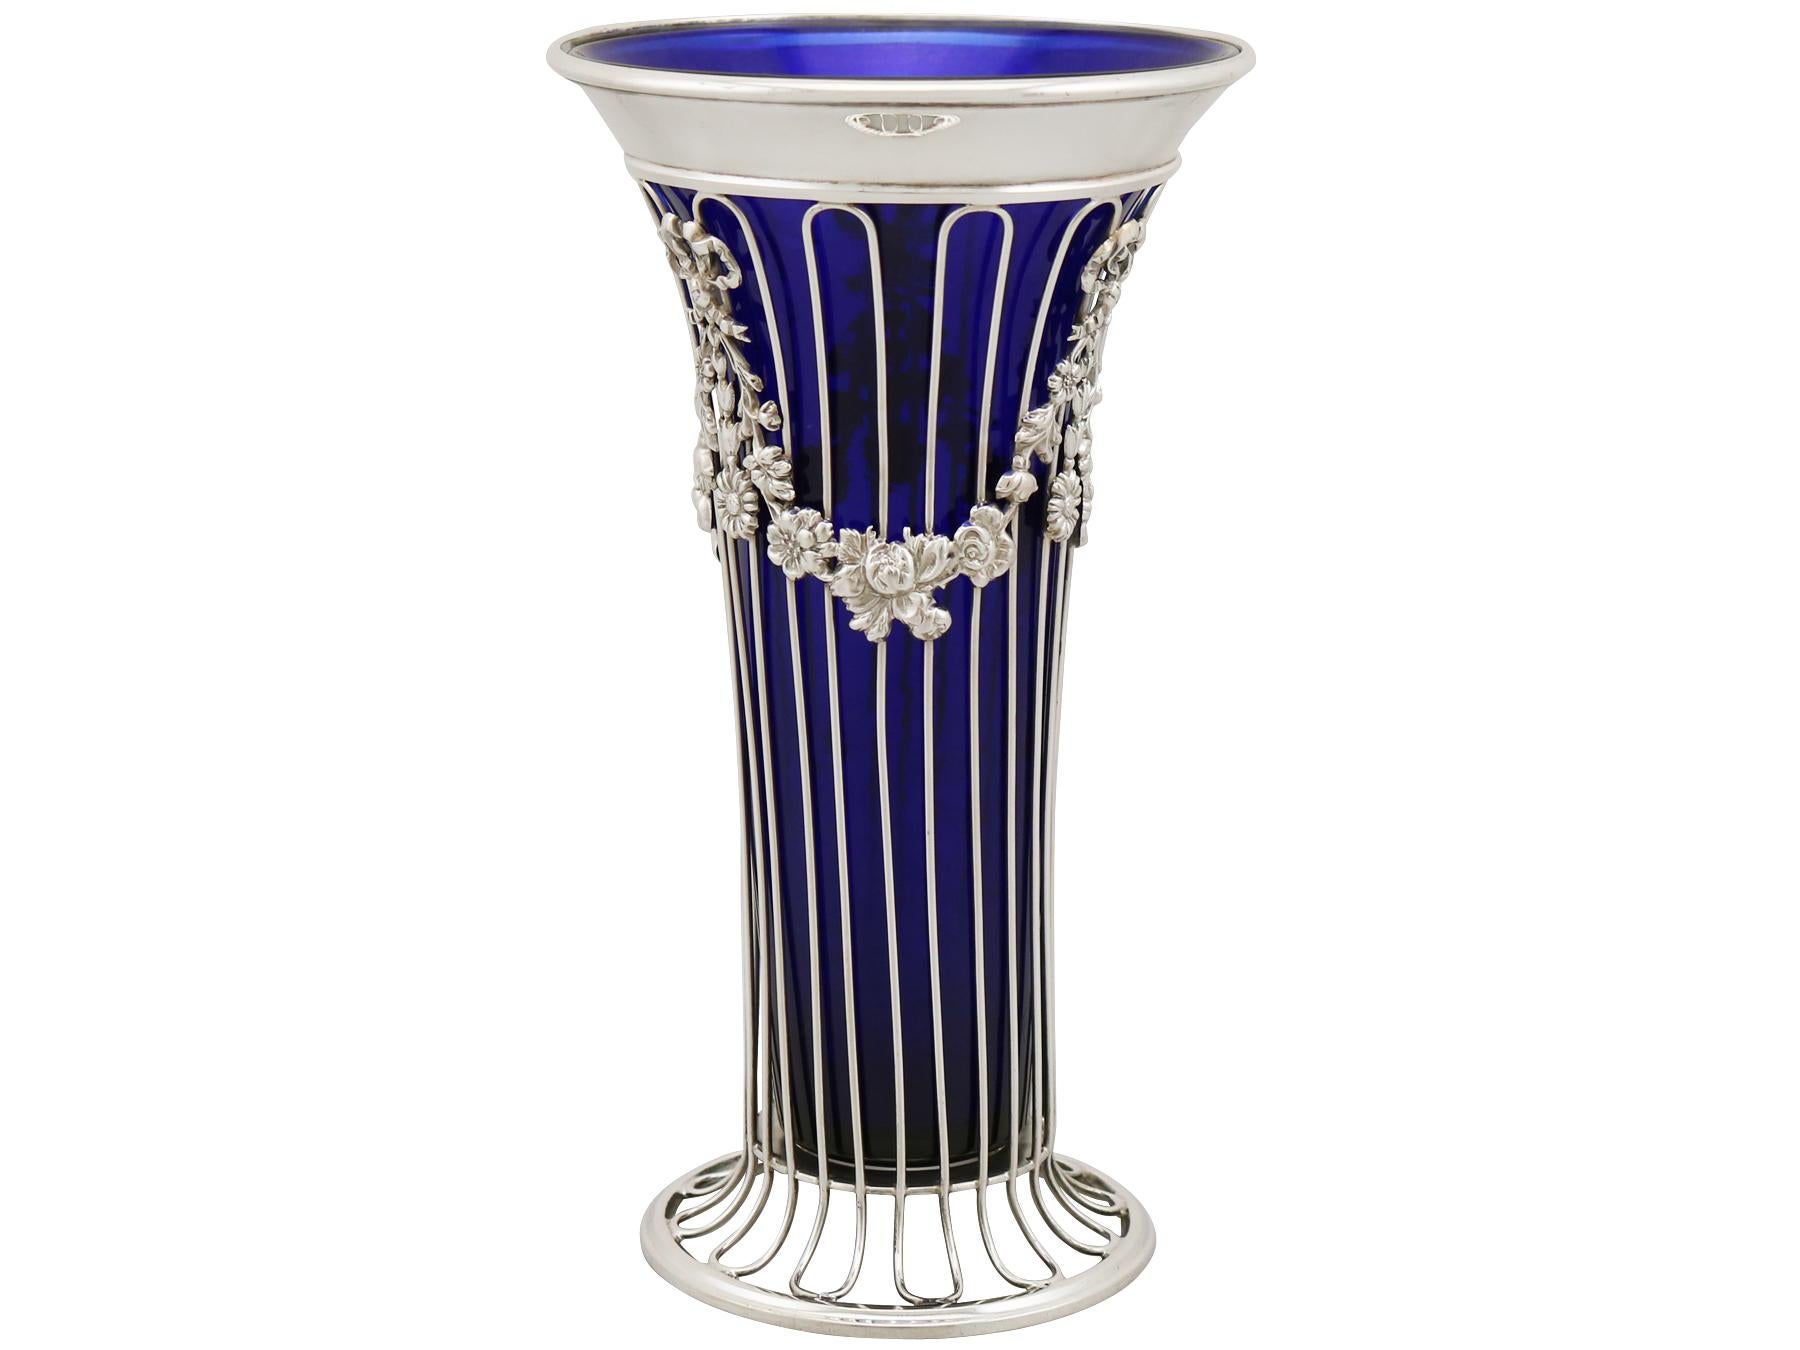 An exceptional, fine and impressive antique Edwardian English sterling silver and glass vase; an addition to our ornamental silverware collection.

This exceptional antique sterling silver vase has a tapering cylindrical form to a swept circular